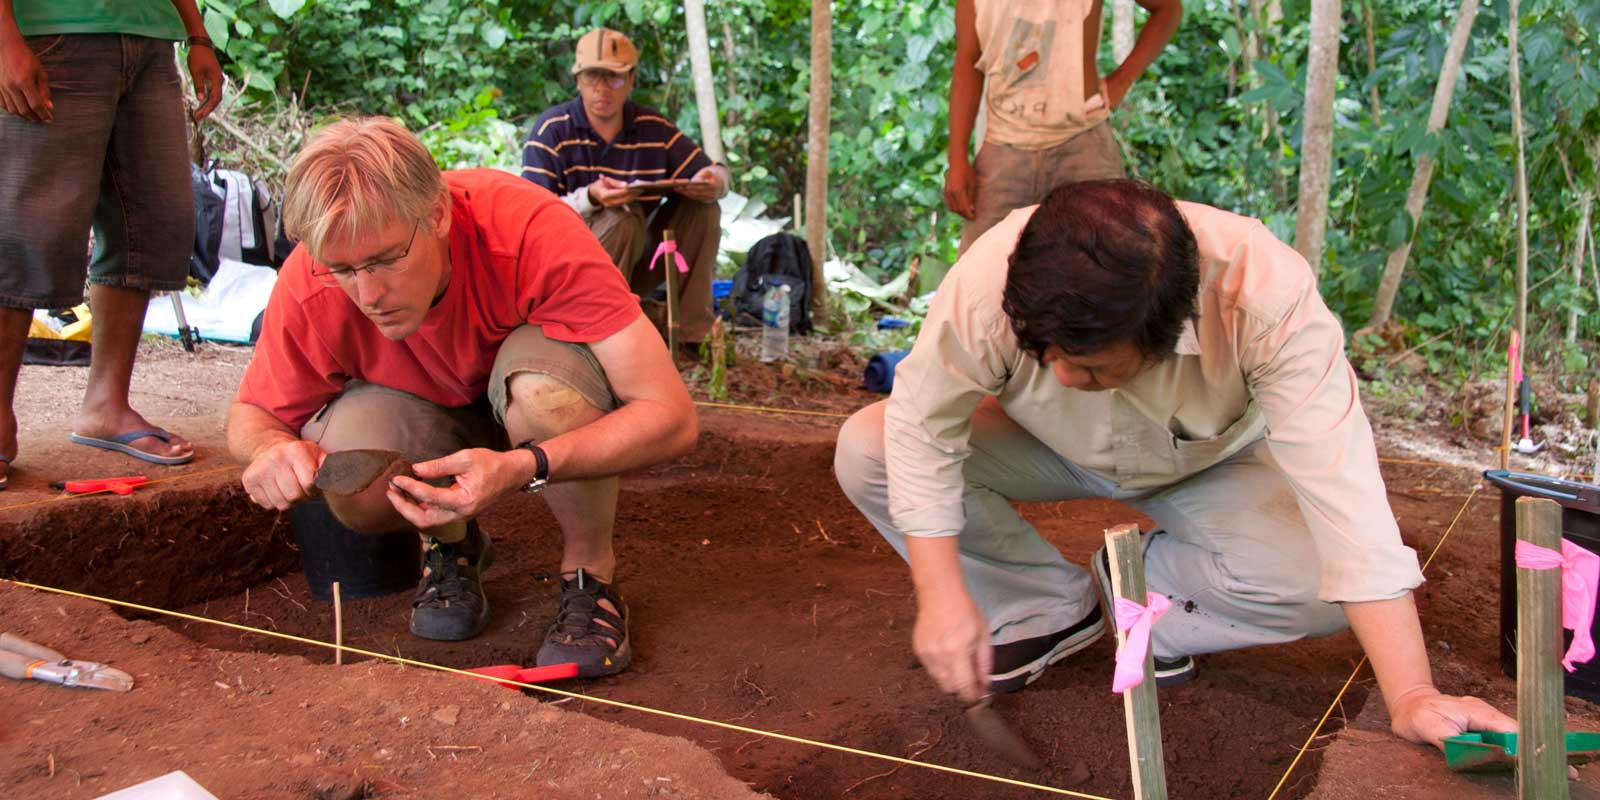 Two men kneel in an archaeological dig site and closely examine sediment for artifacts